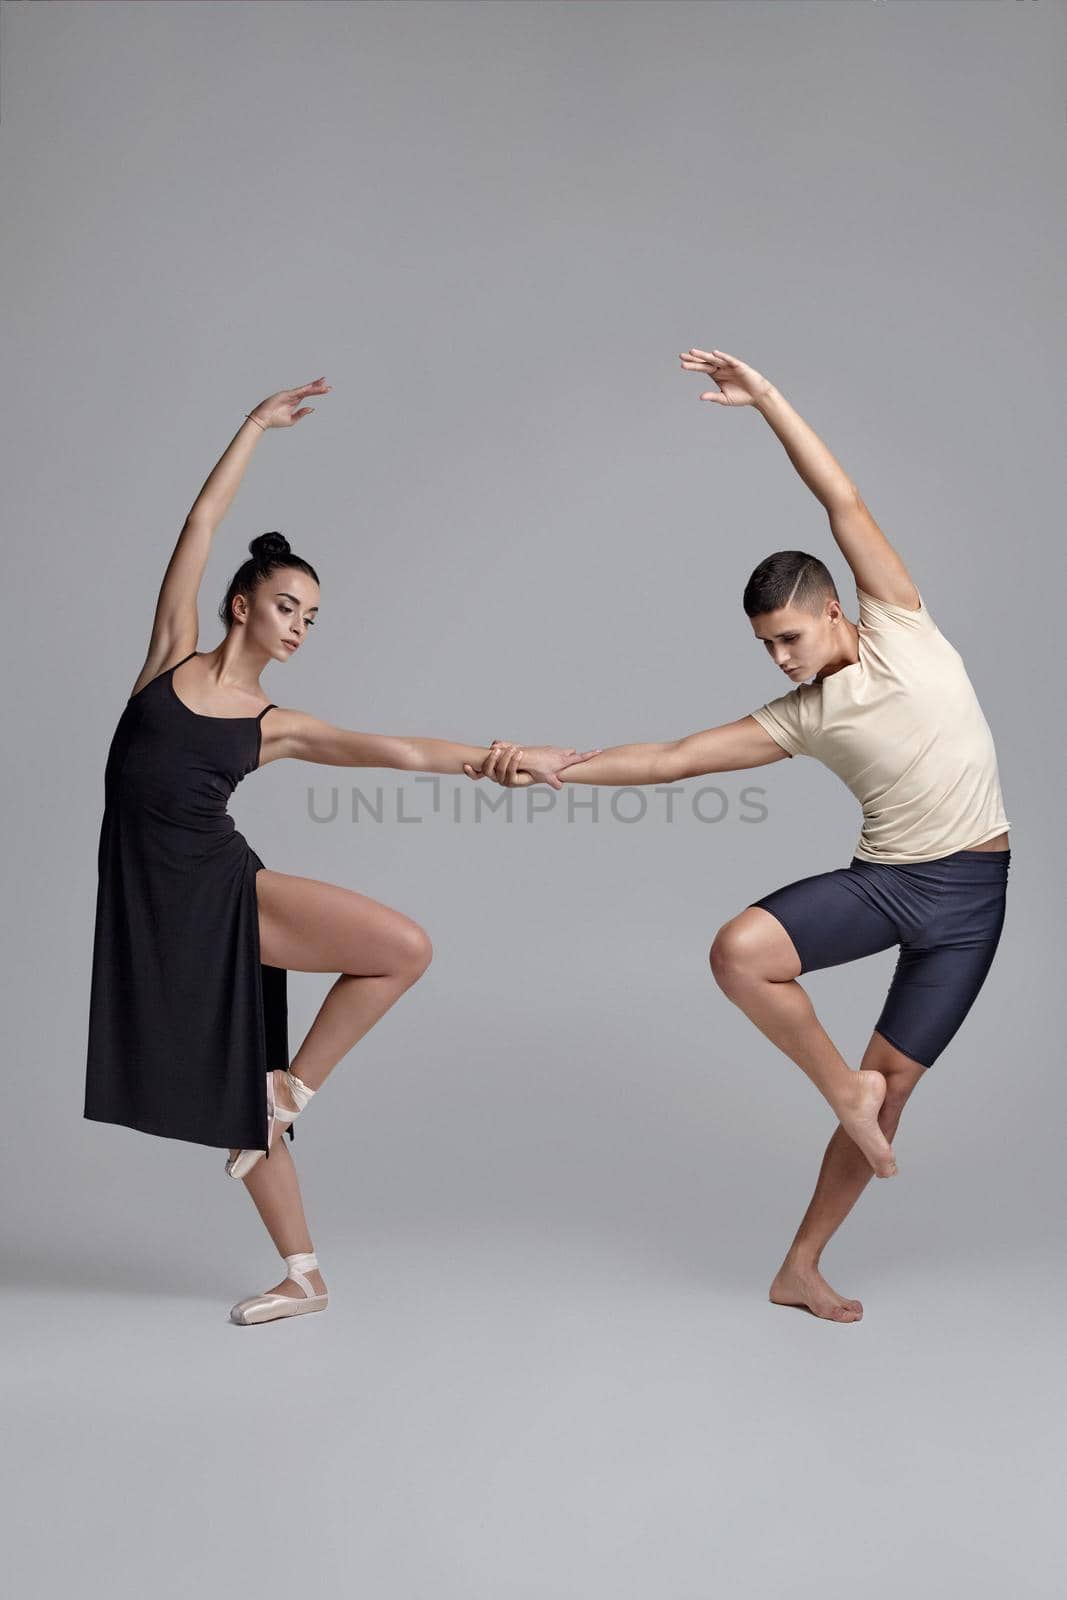 Two young ballet dancers are posing over a gray studio background. Attractive man in black shorts with beige t-shirt and beautiful woman in a black dress and white pointe shoes are dancing together. Ballet and contemporary choreography concept. Art photo.